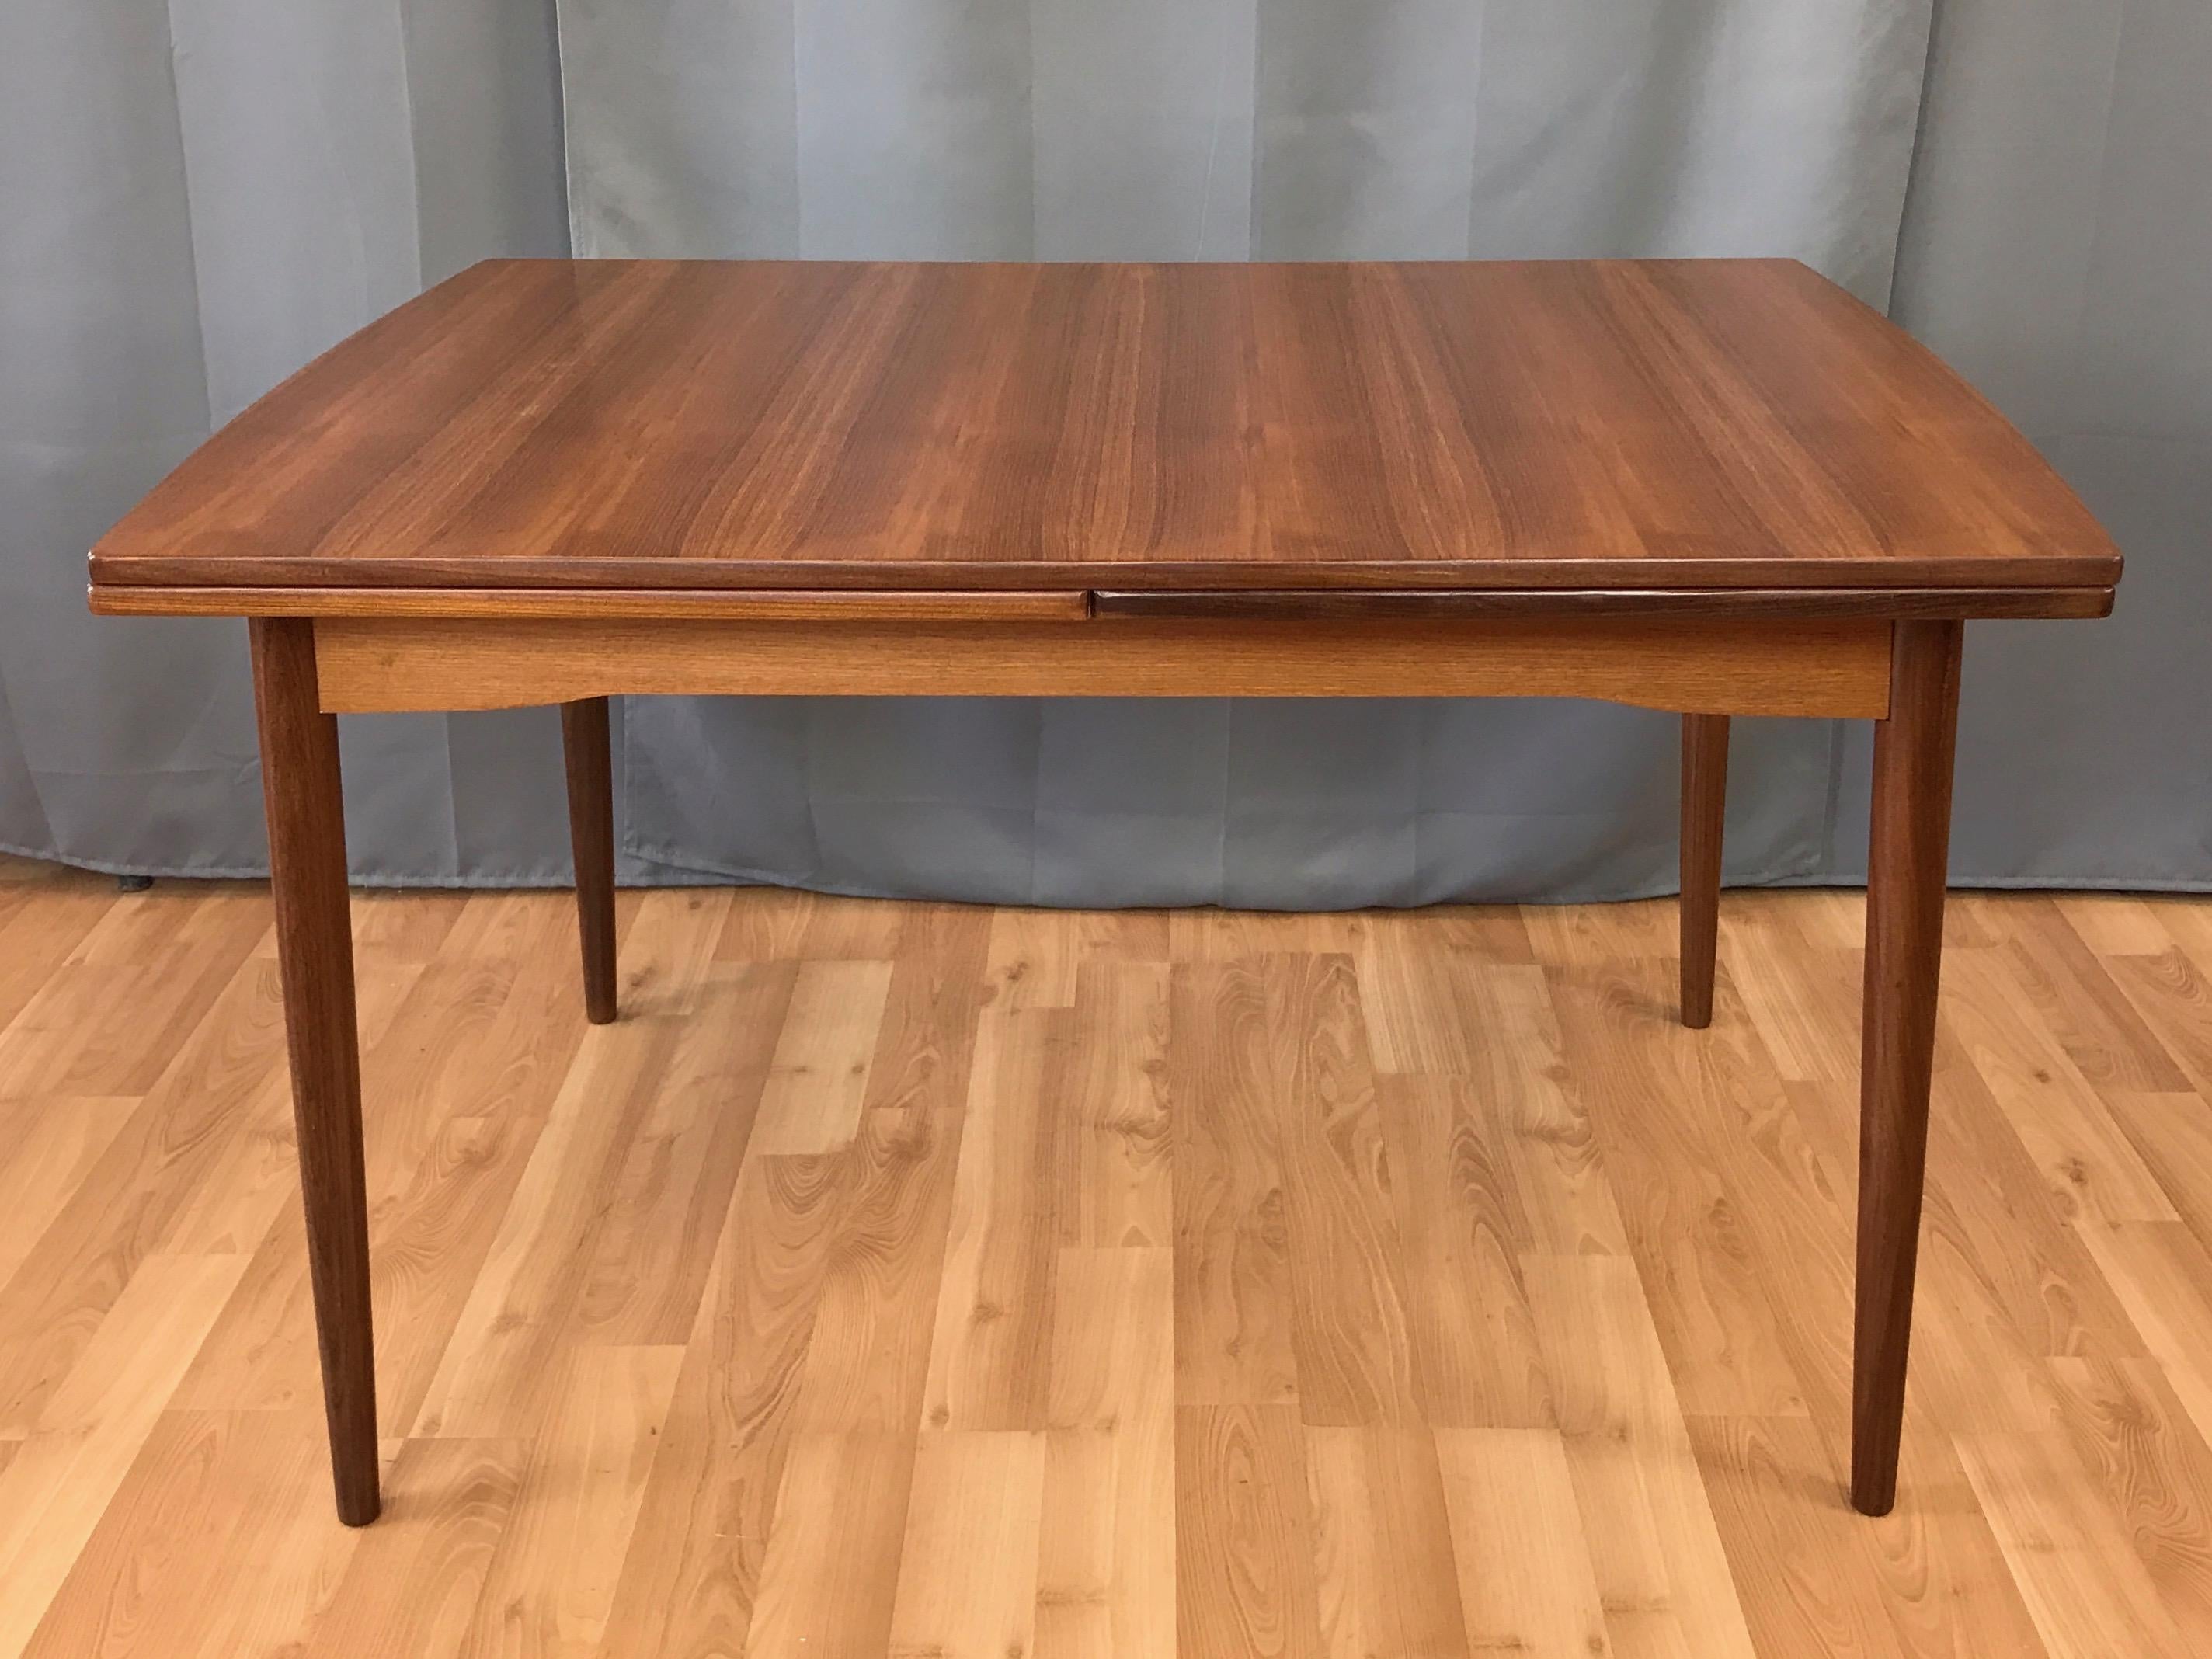 A large 1960s Danish modern draw leaf extendable teak dining table.

Expansive top and leaves have subtly curved ends, and feature vibrantly striped bookmatched teak veneer. On solid teak tapered legs. Length extends from 48 in. to 94 in., seating